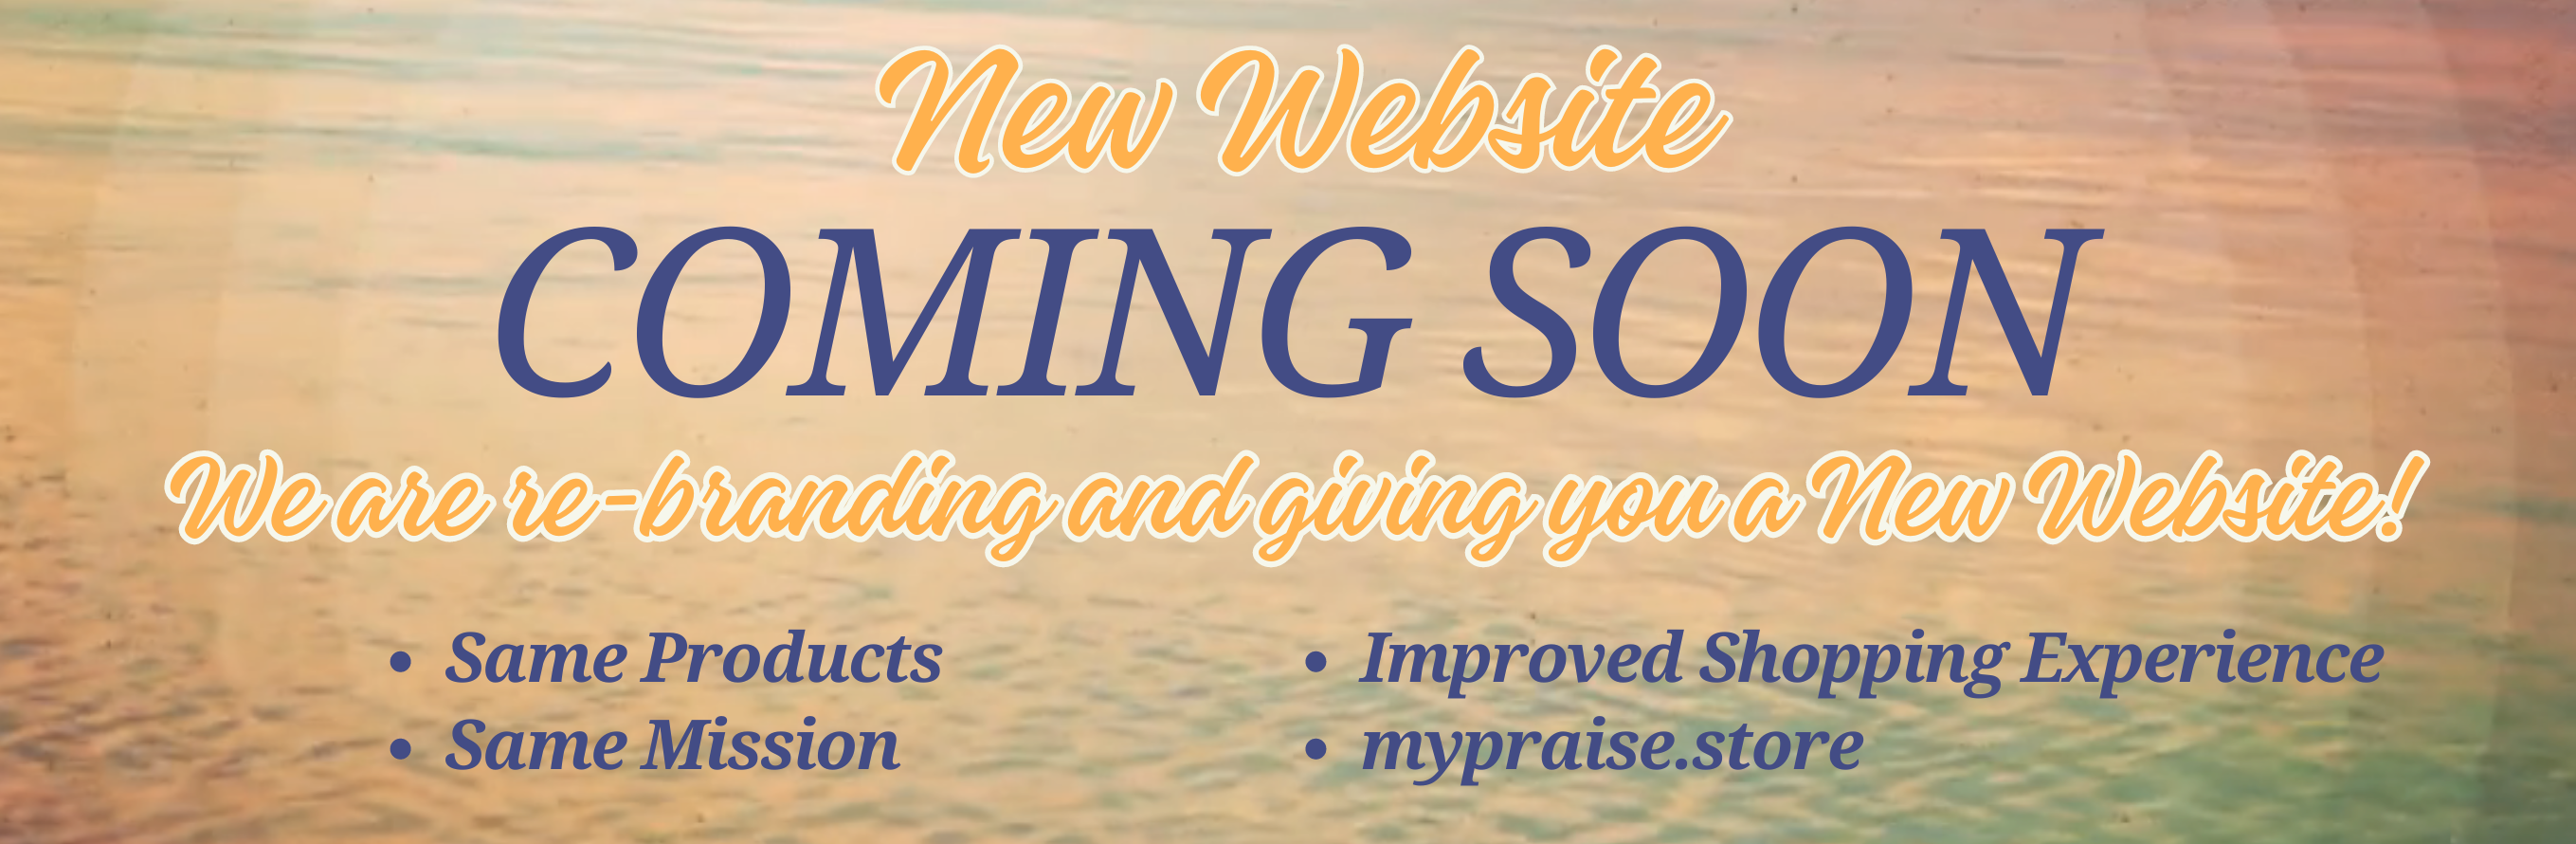 Christwill will soon become mypraise.store with a new redesigned website.